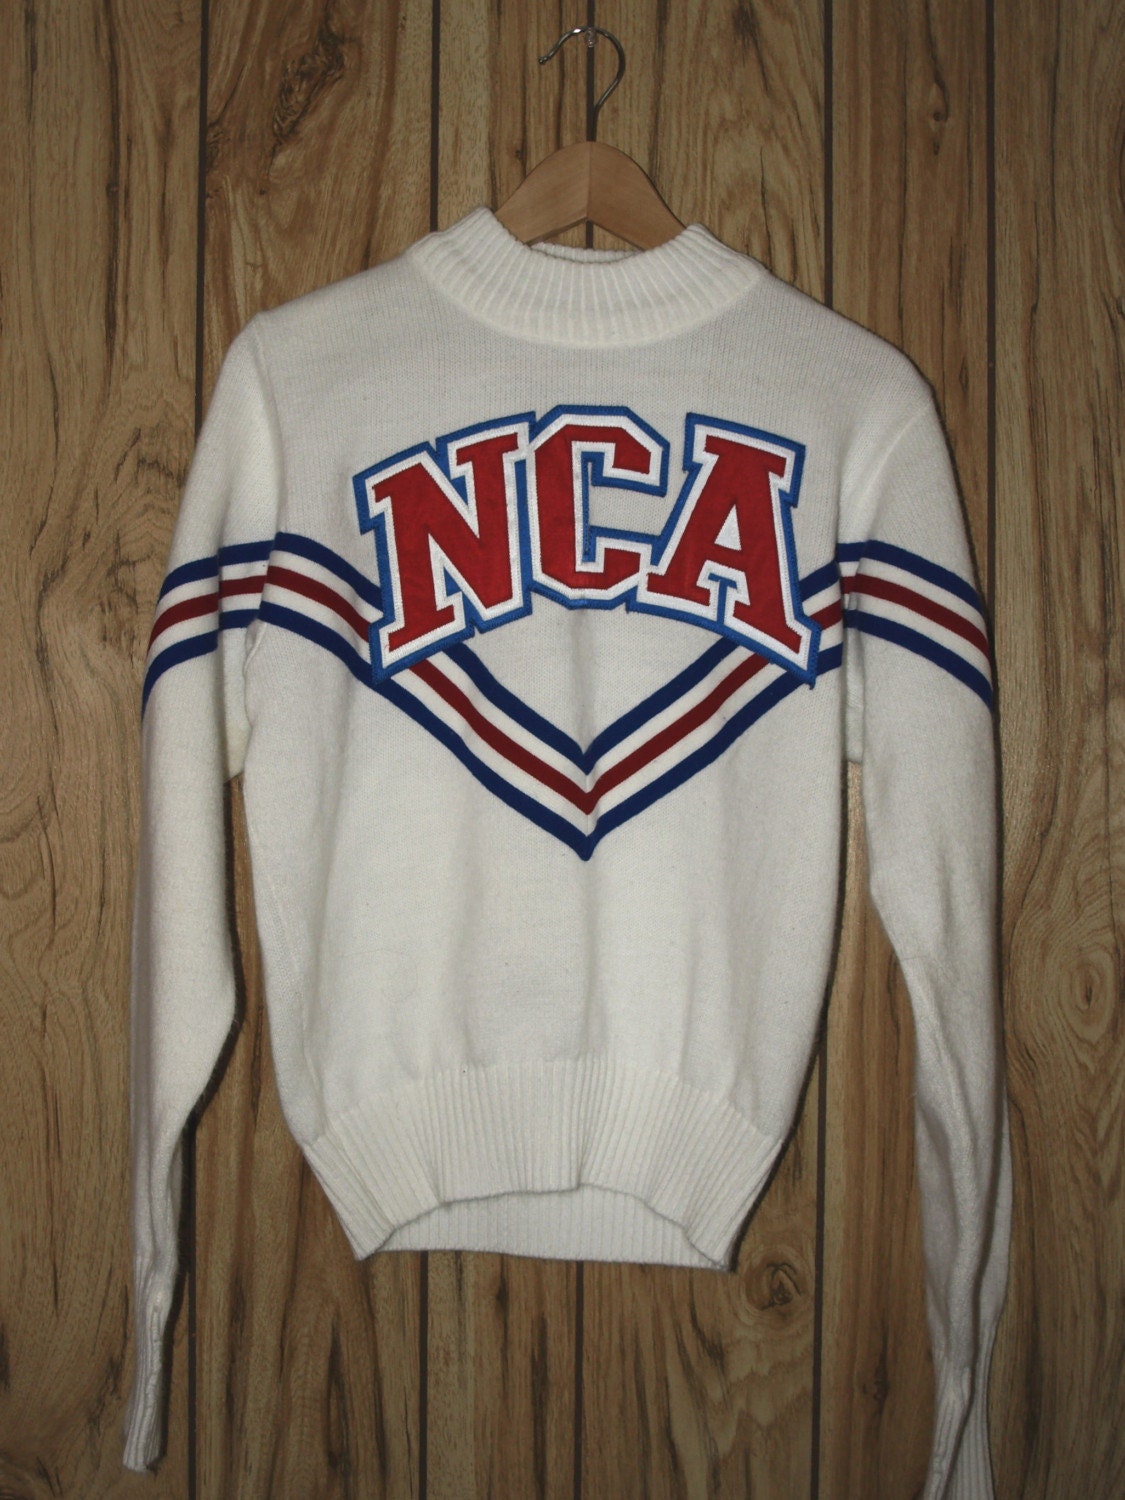 Vintage Cheerleading Sweater by horriblyfashionable on Etsy